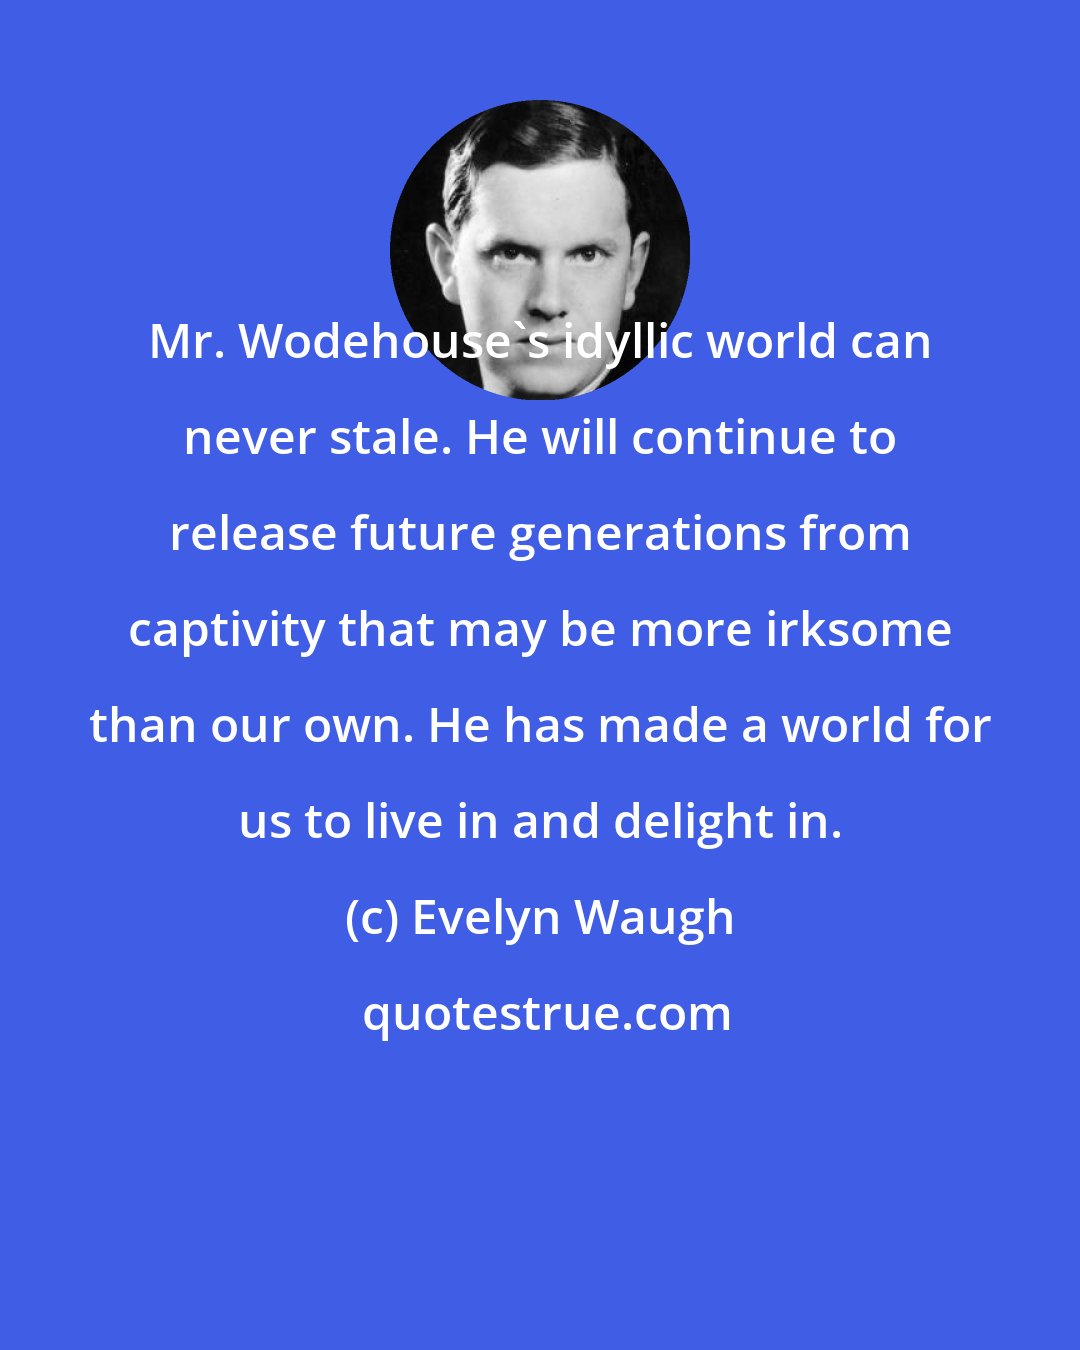 Evelyn Waugh: Mr. Wodehouse's idyllic world can never stale. He will continue to release future generations from captivity that may be more irksome than our own. He has made a world for us to live in and delight in.